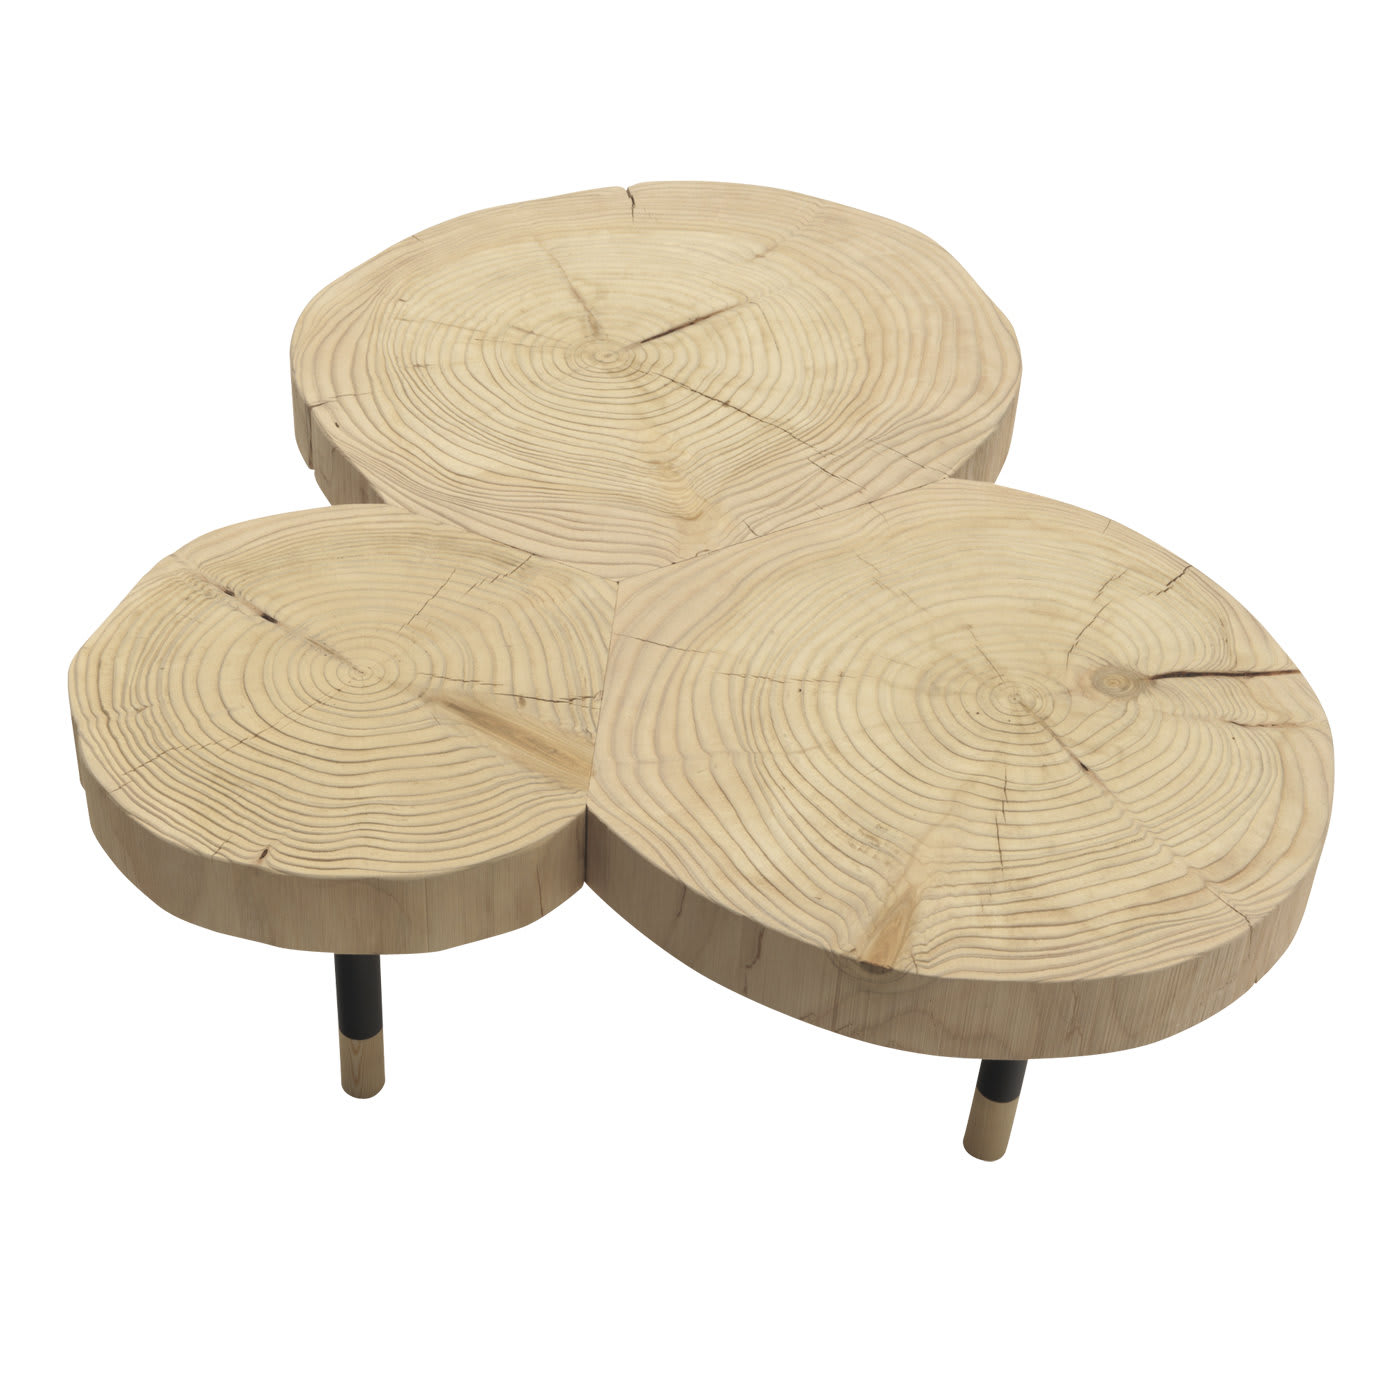 InsTable Coffee Table - Durame